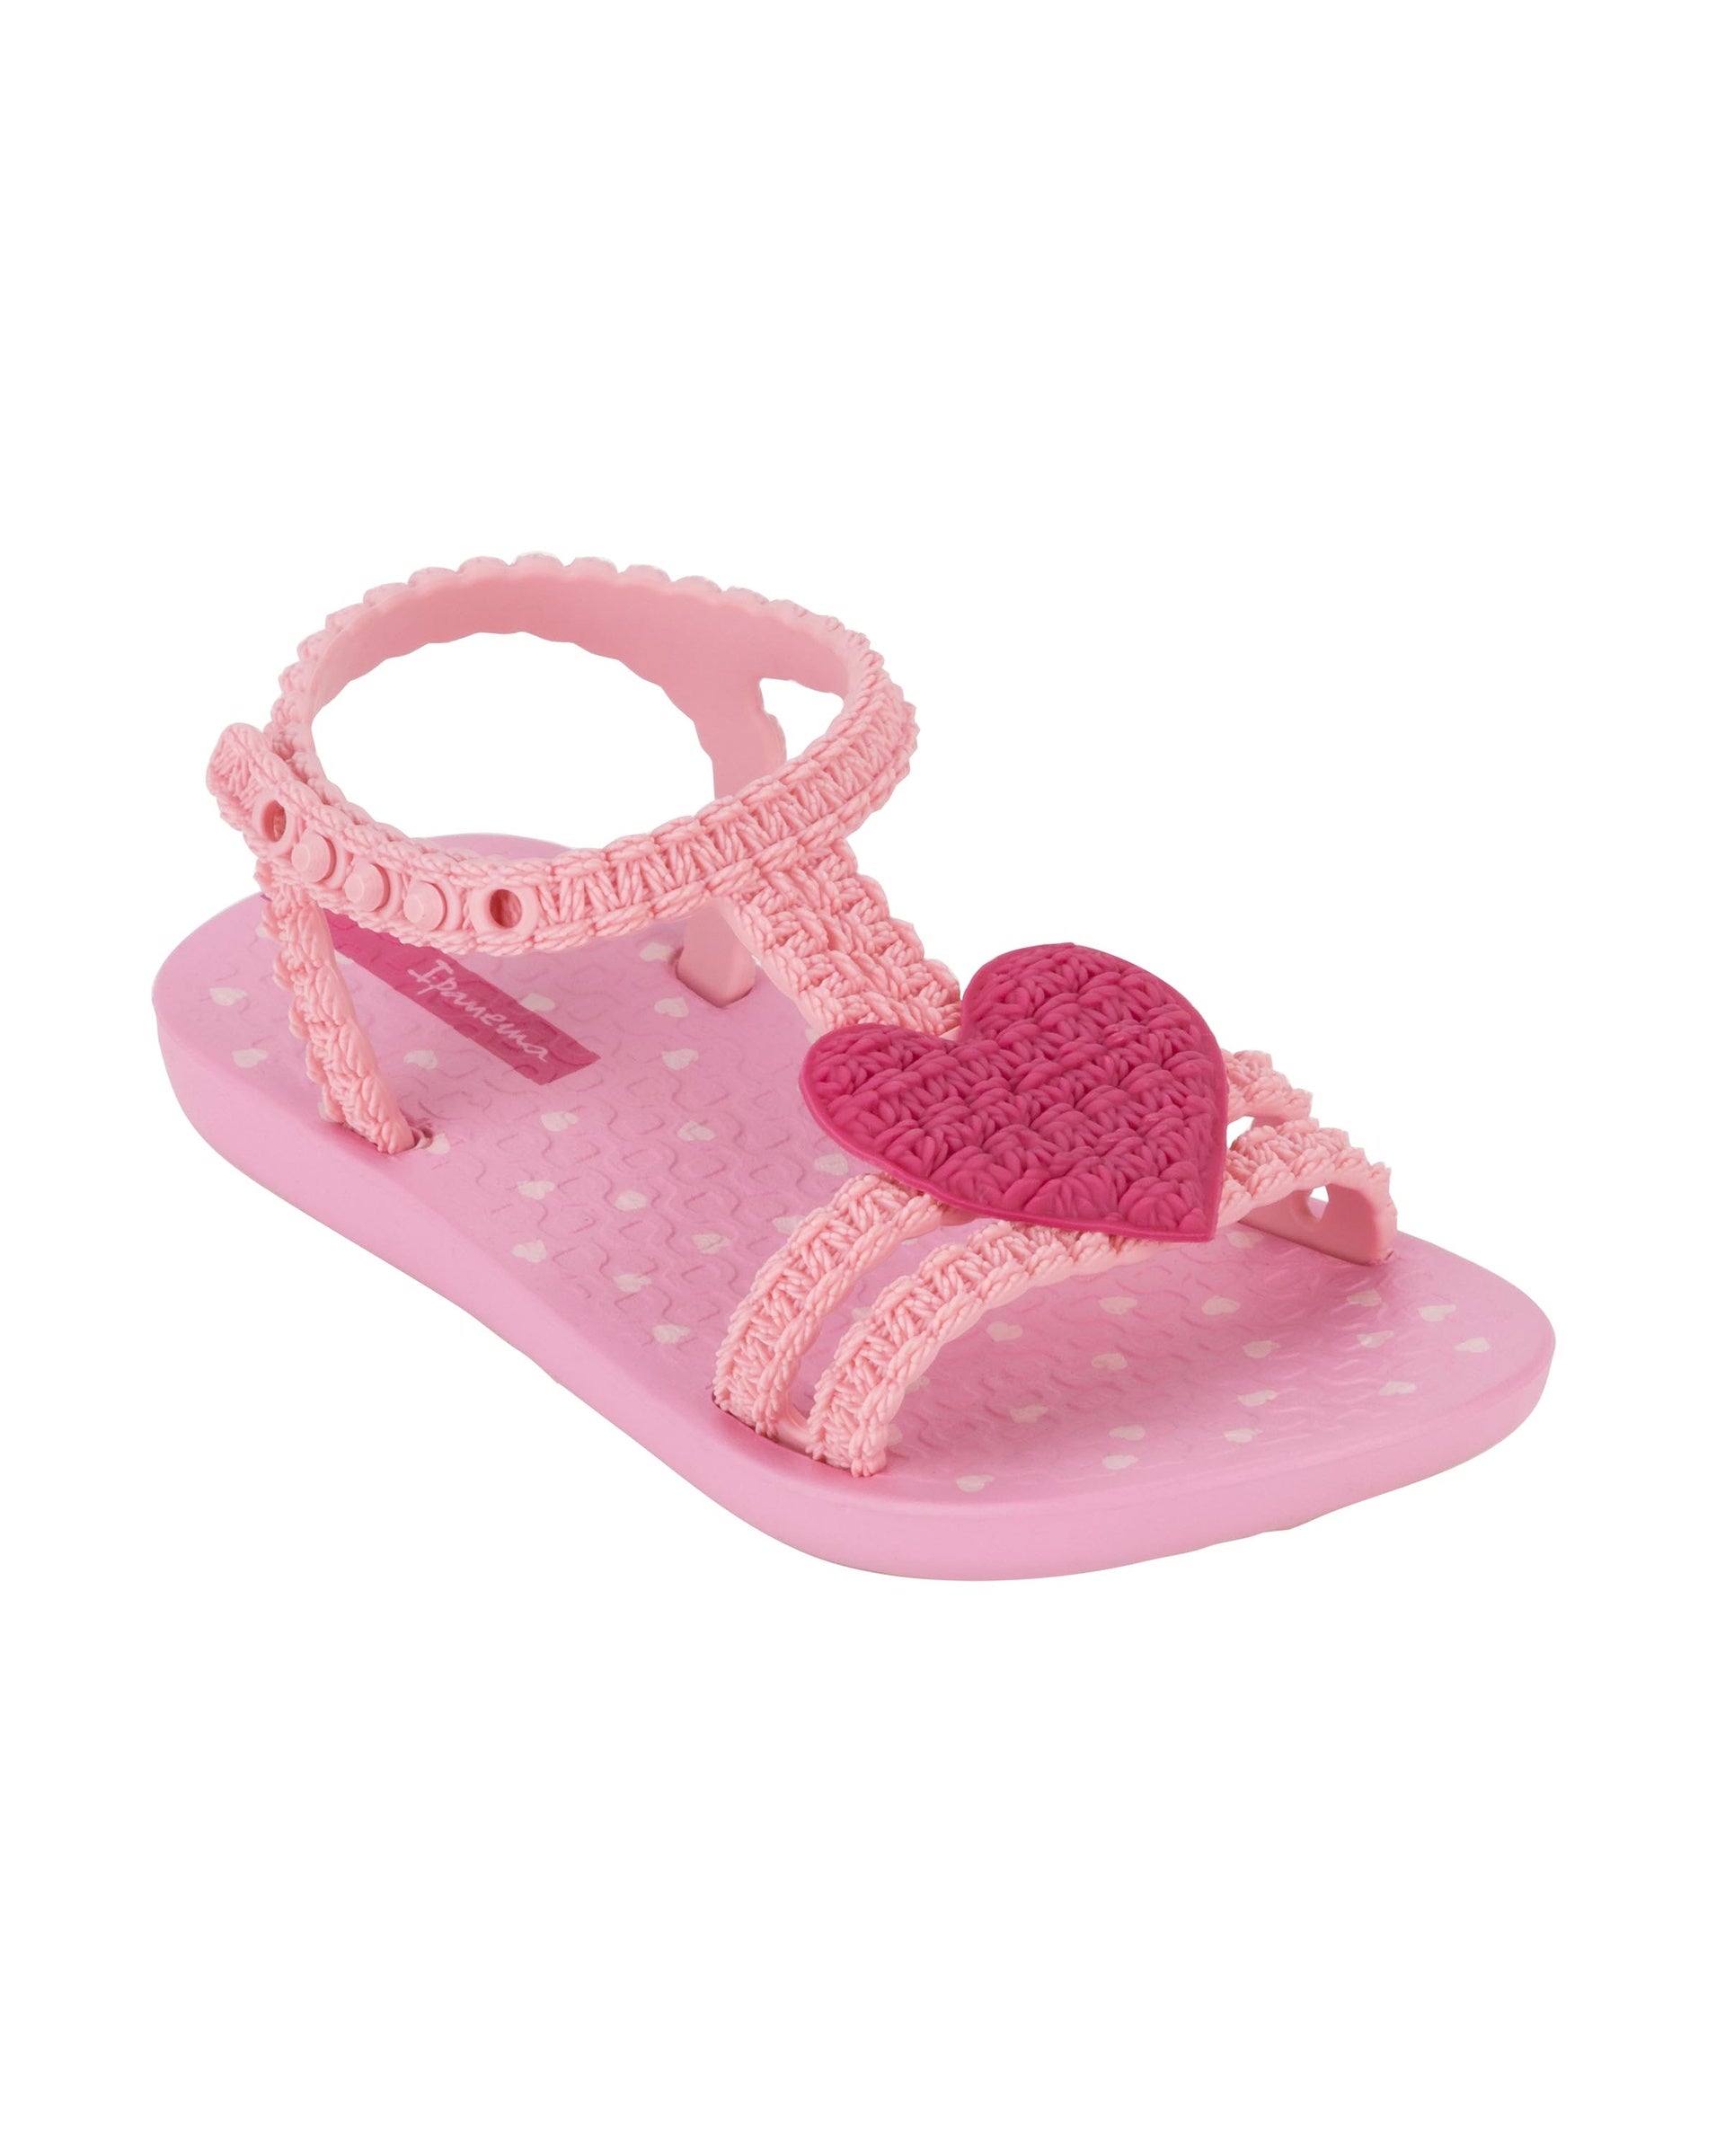 Angled view of a pink Ipanema My First Ipanema baby sandal with pink heart on top and crochet texture .